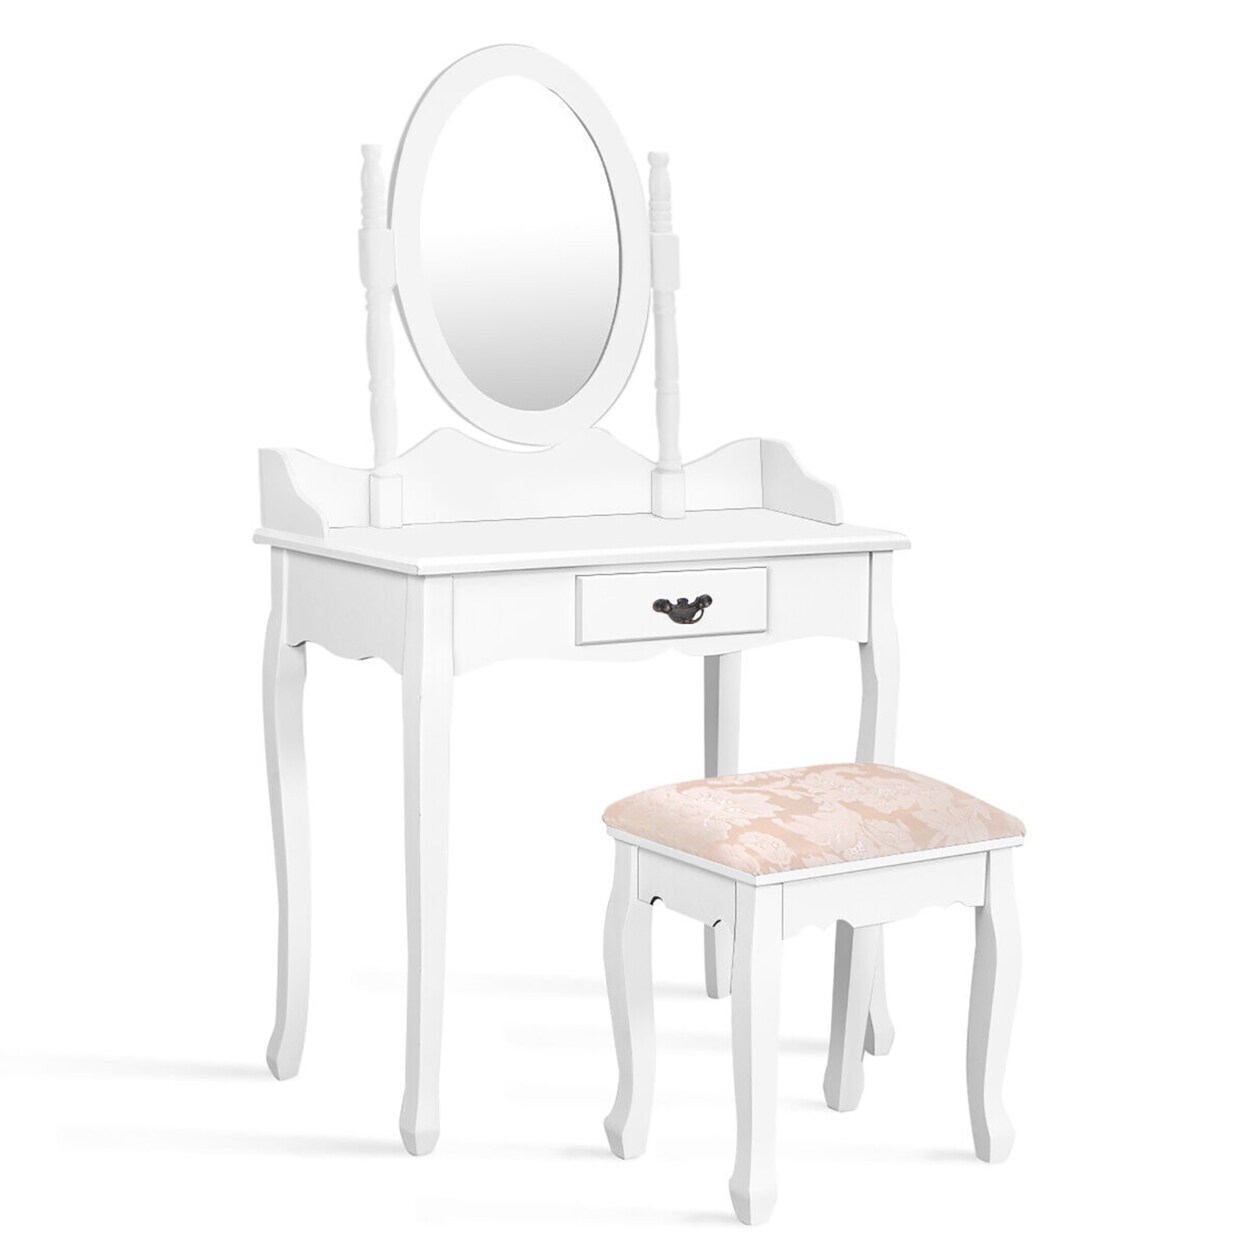 Gymax Vanity Wood Makeup Dressing Table Stool Set w/ Drawer and Mirror Jewelry Desk White